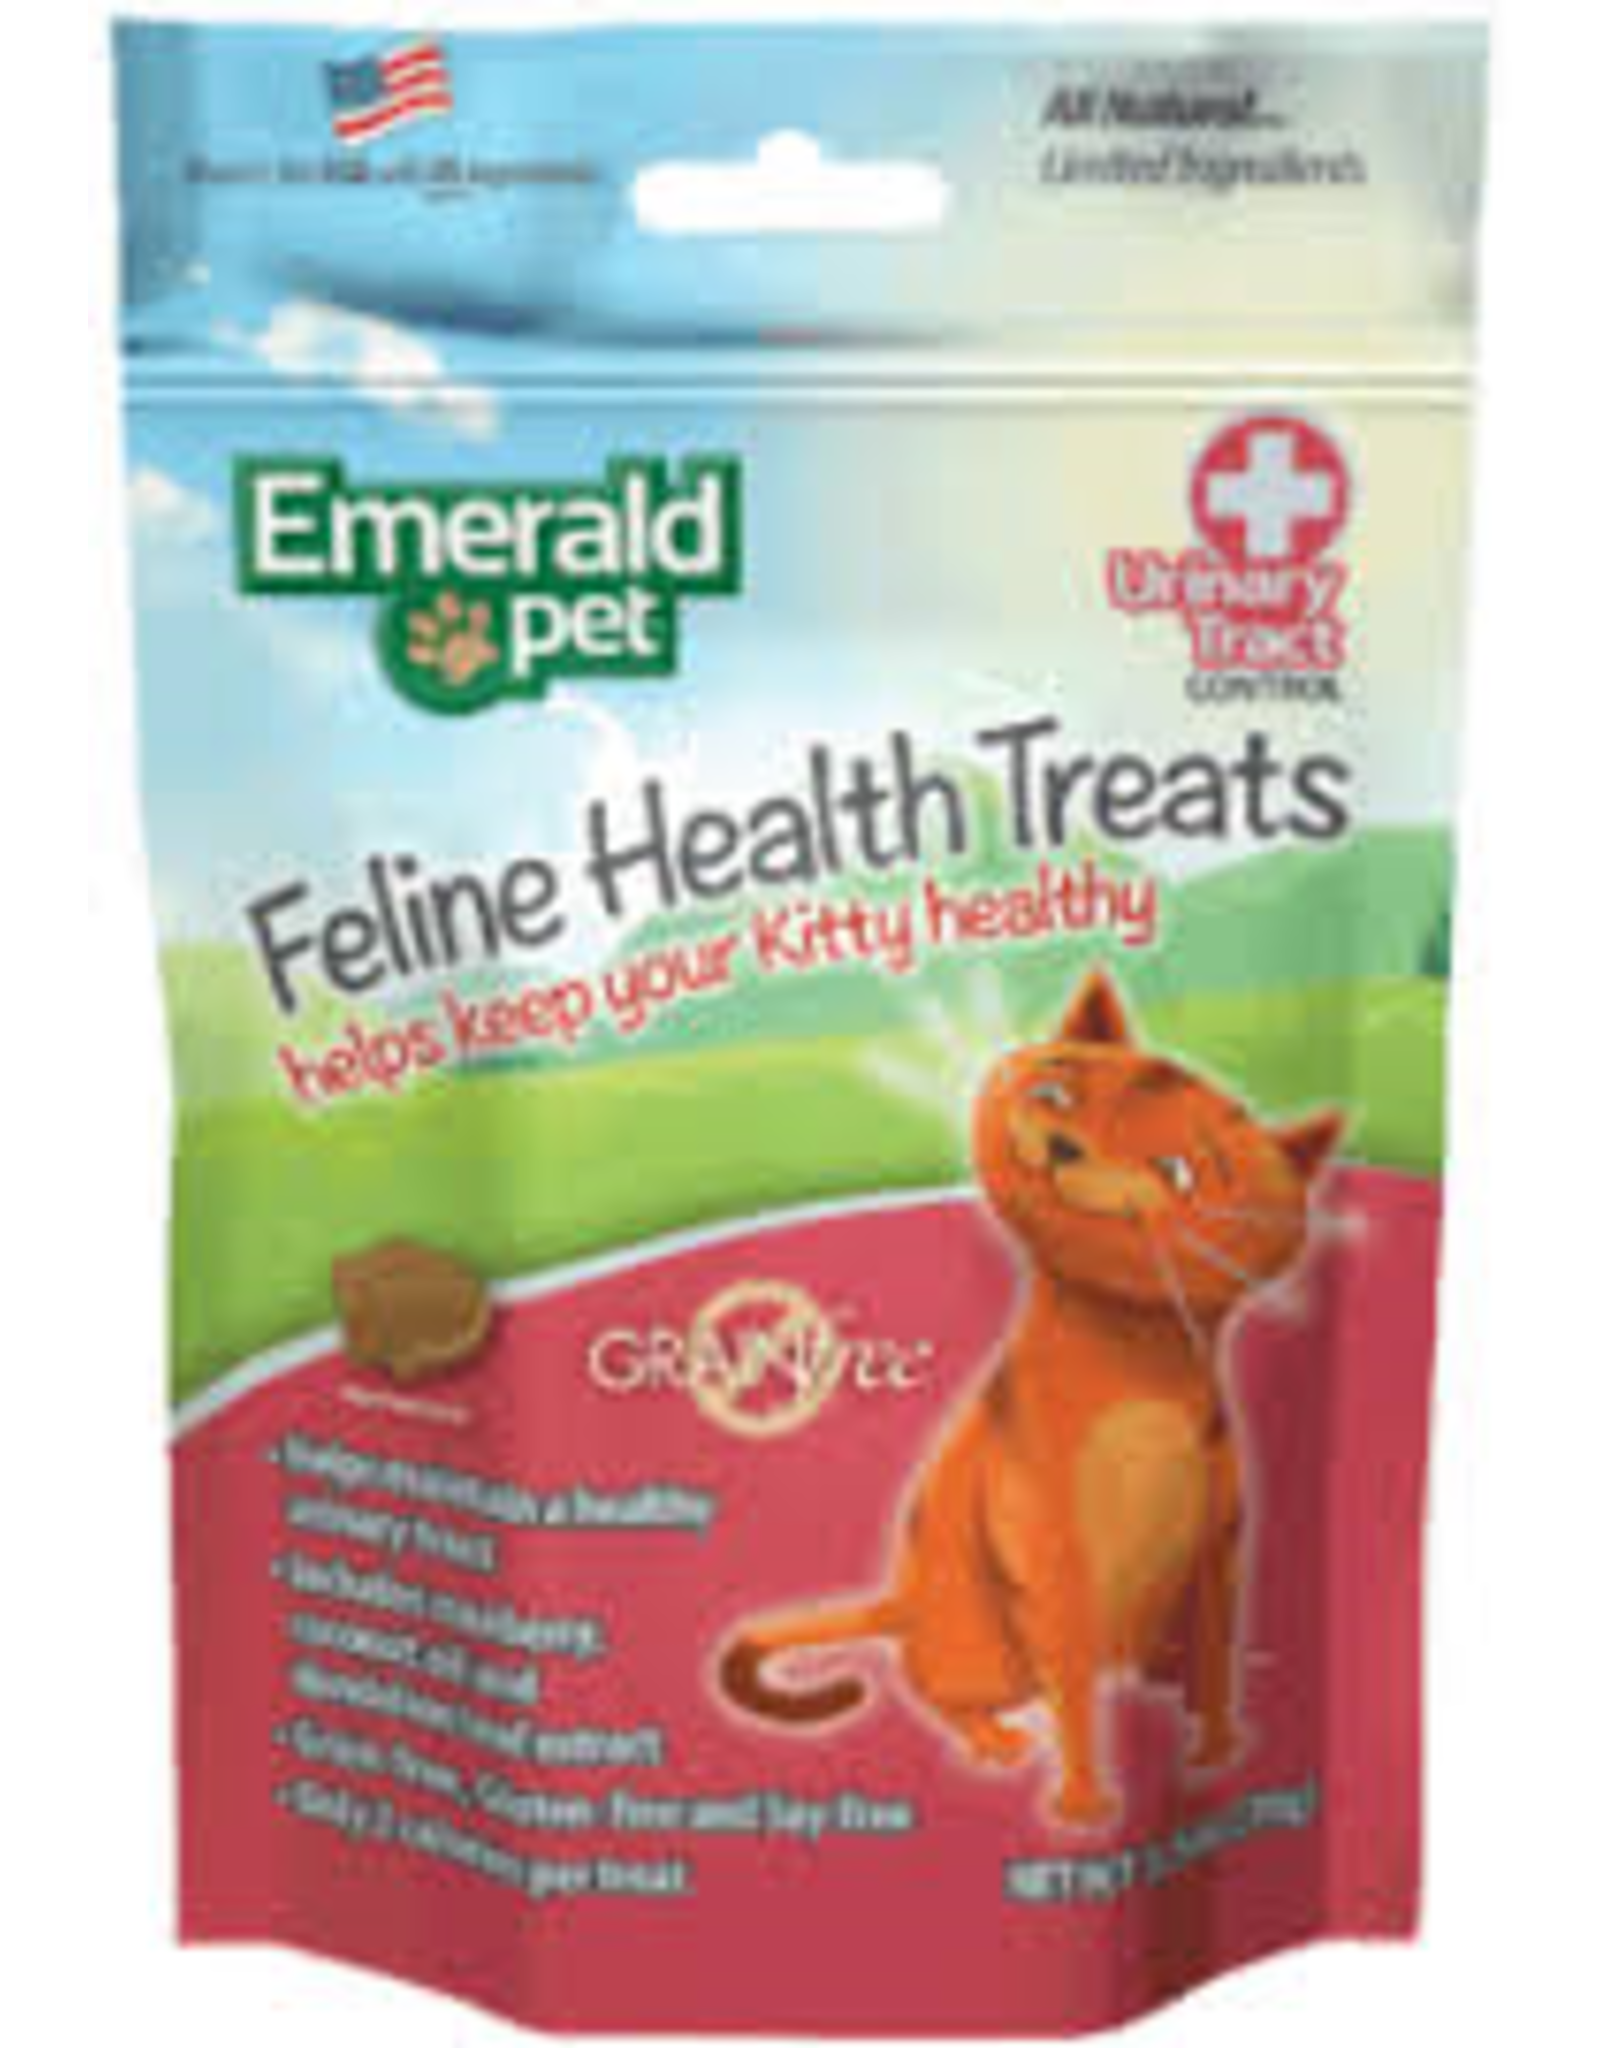 emerald pet Smart'n'tasty Gâteries urinaire 70g (Chat)